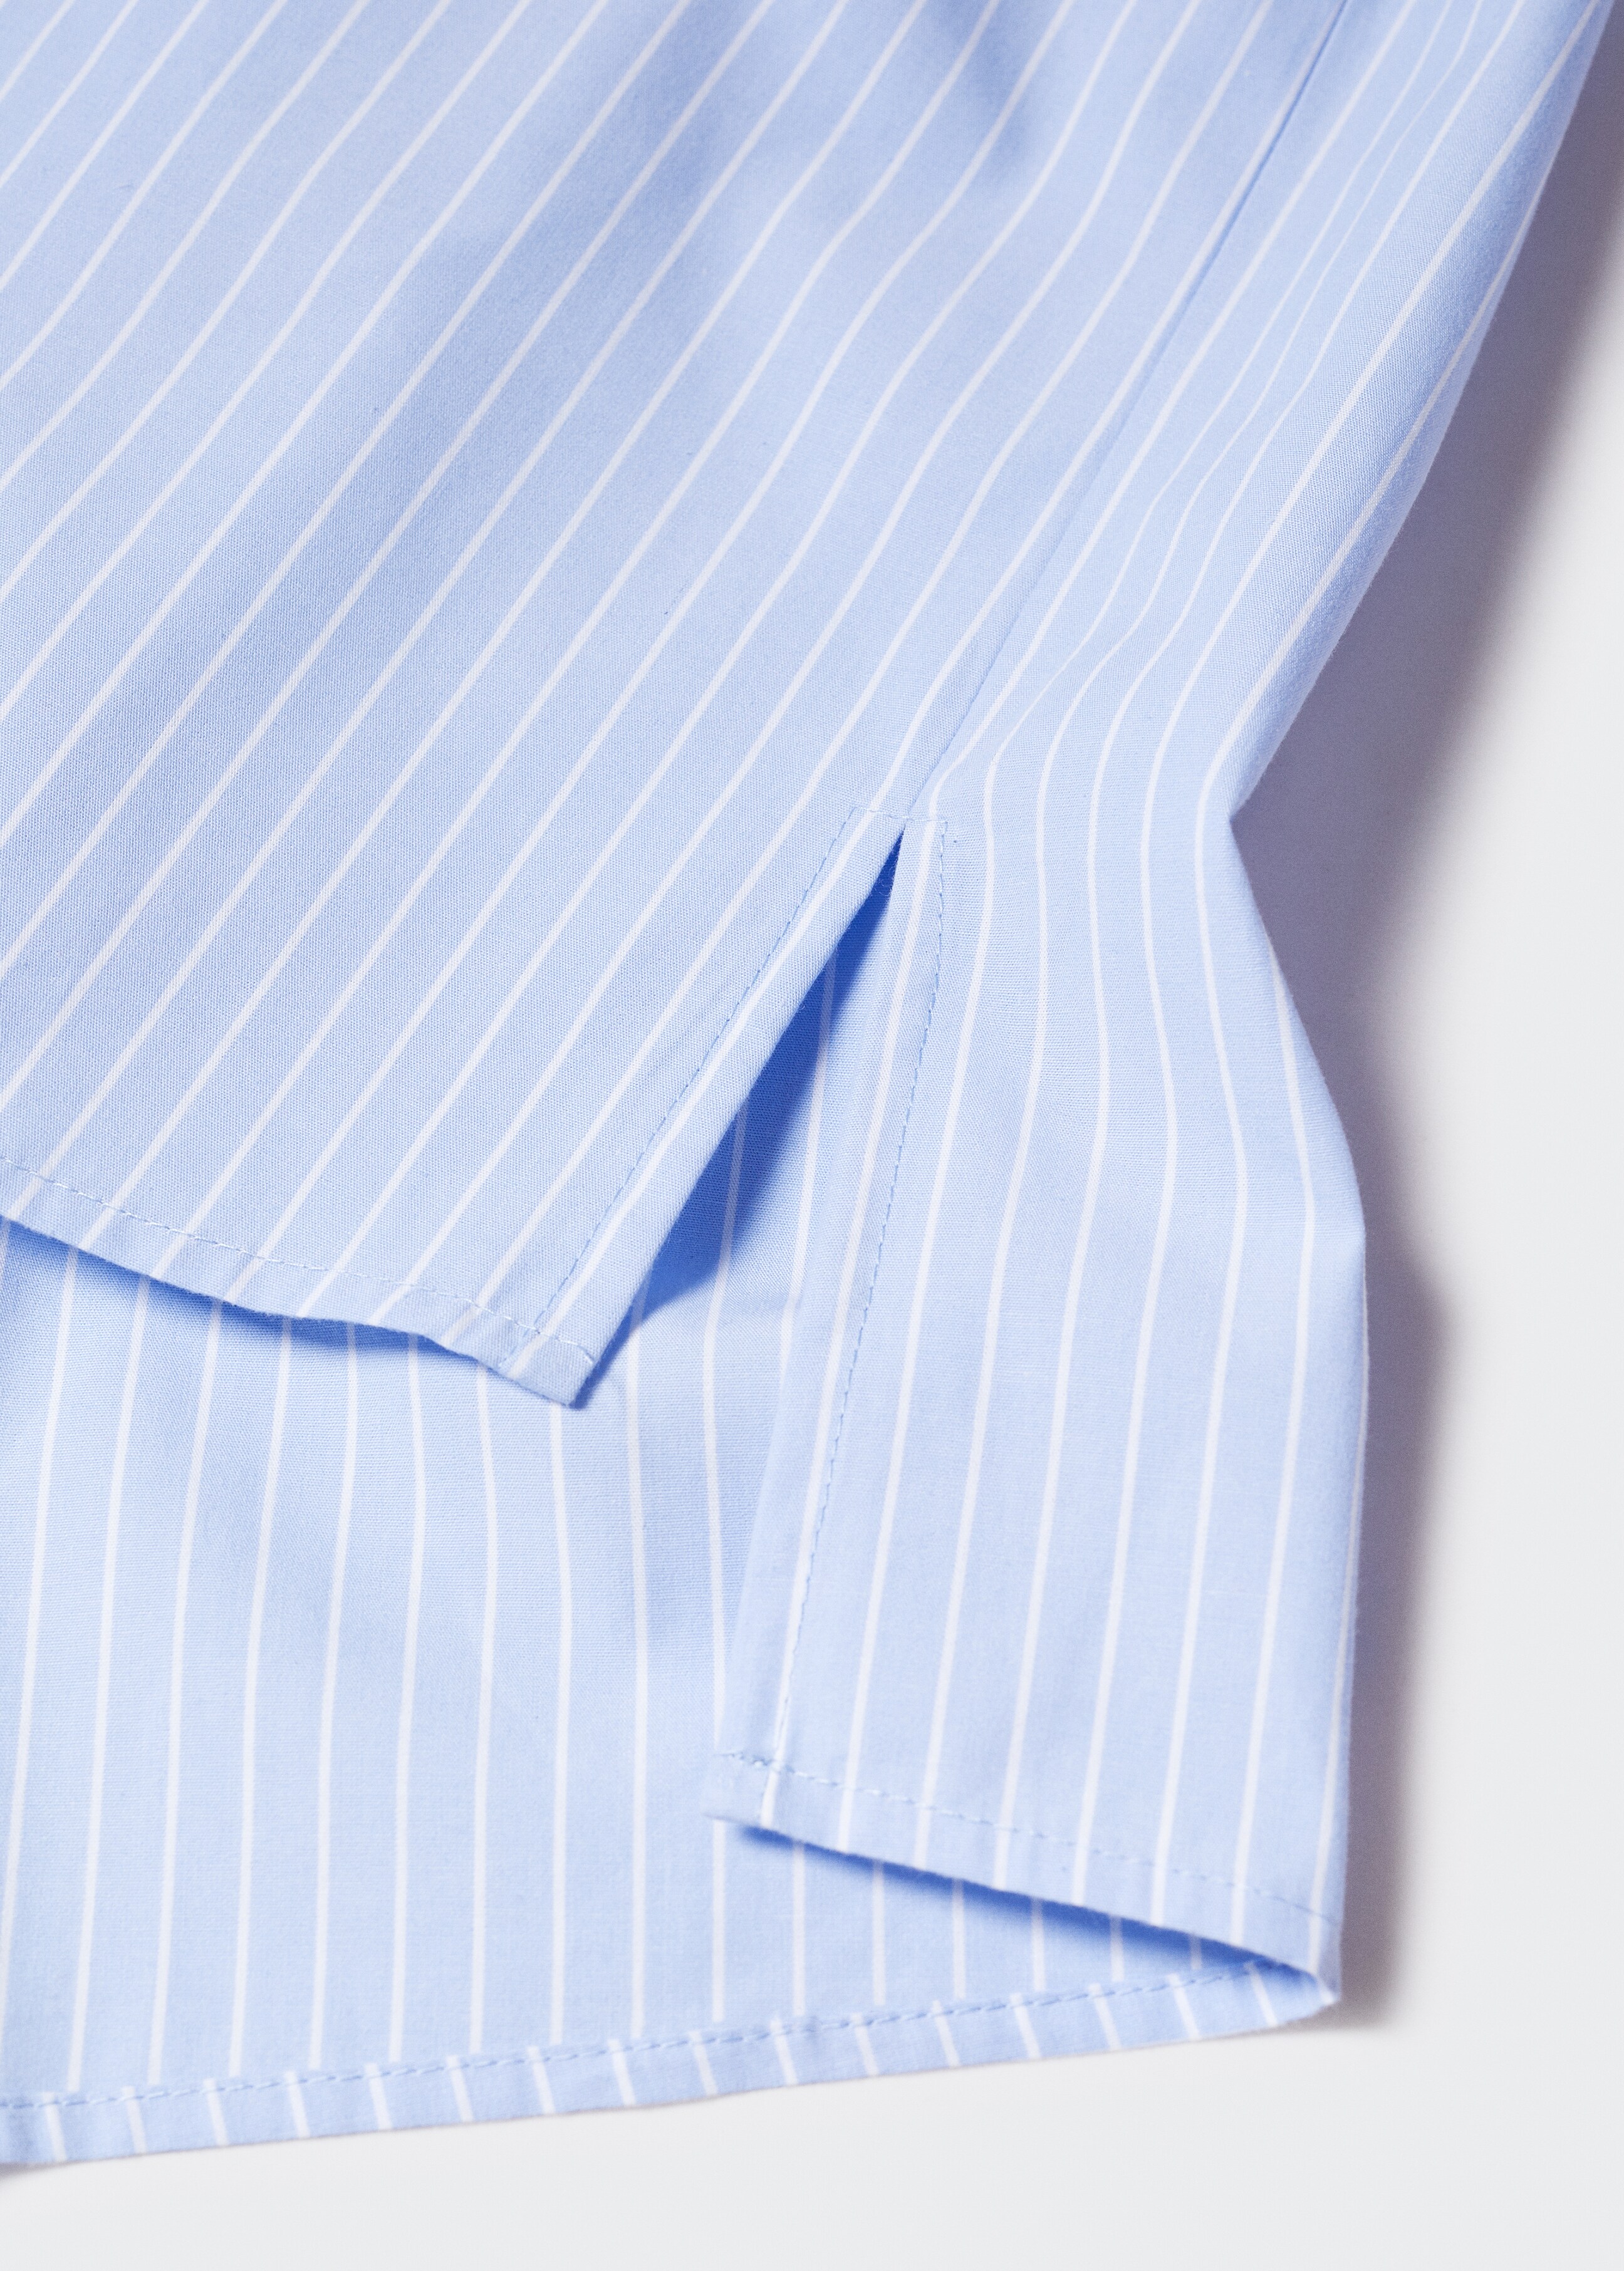 Striped shirt - Details of the article 8